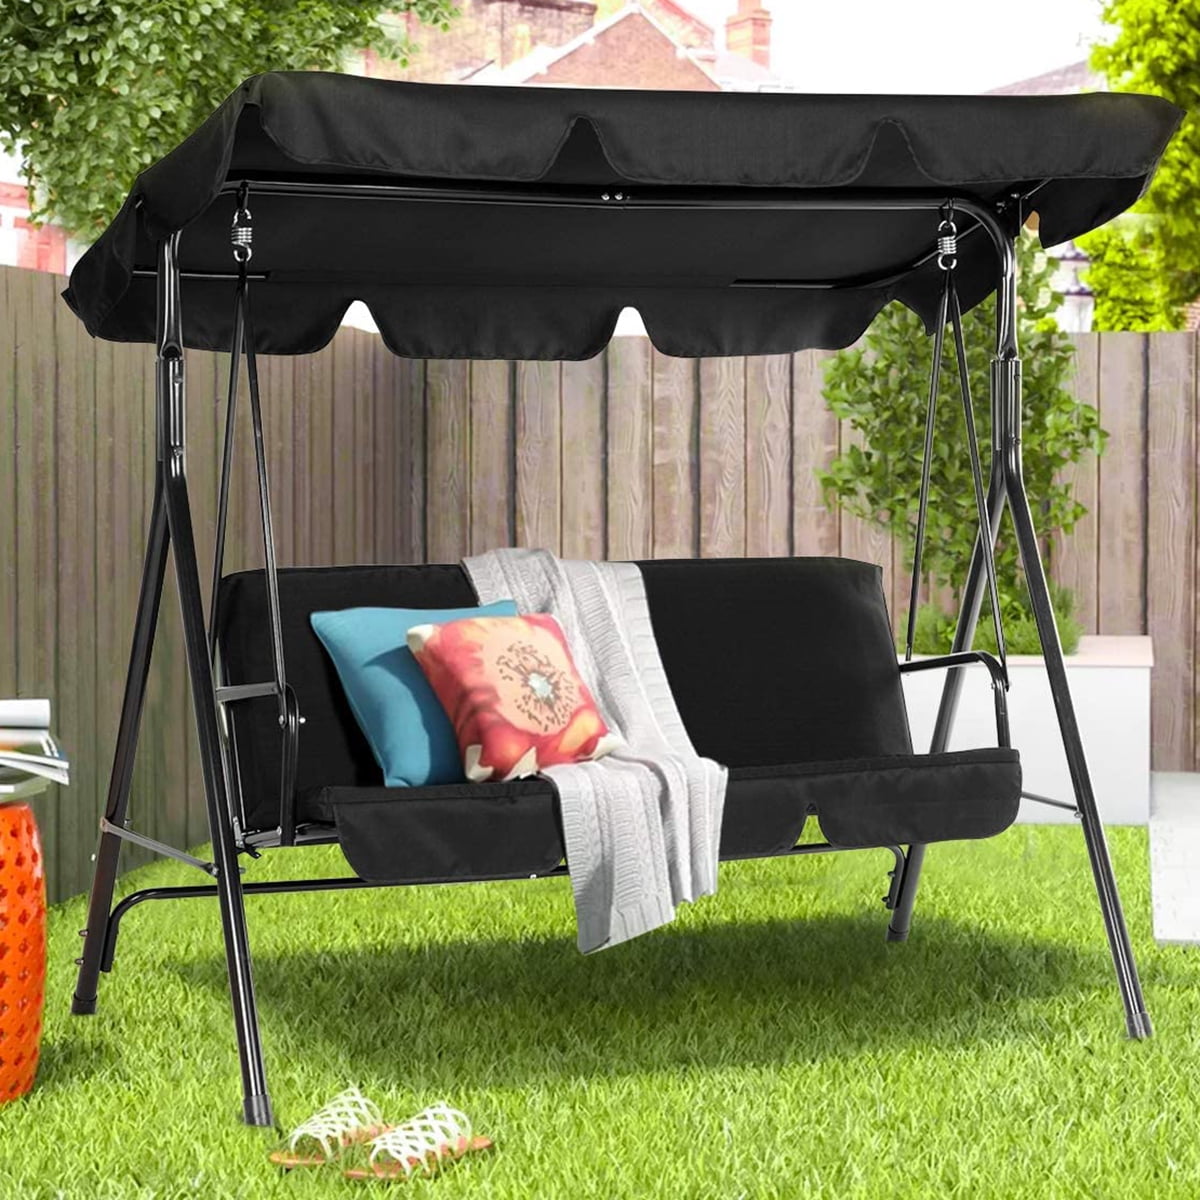 Outdoor Garden Courtyard Patio Waterproof Swing Set Cover with Swing Canopy Seat Top Cover SOONHUA Swing Set Cover Swing Seat Cover for Garden Patio Swing Children Playing use.